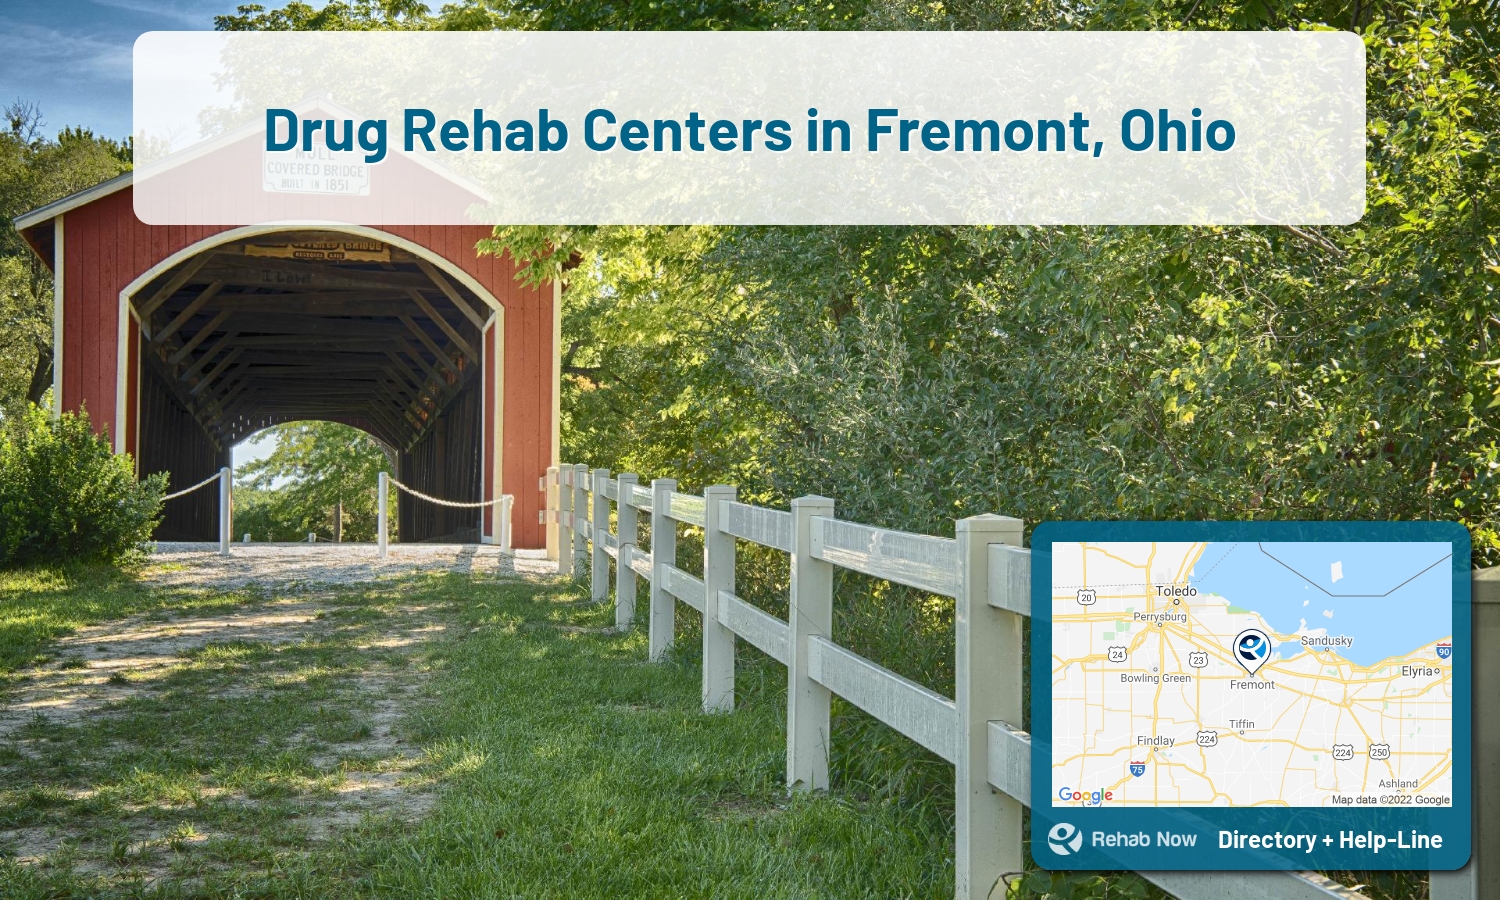 View options, availability, treatment methods, and more, for drug rehab and alcohol treatment in Fremont, Ohio